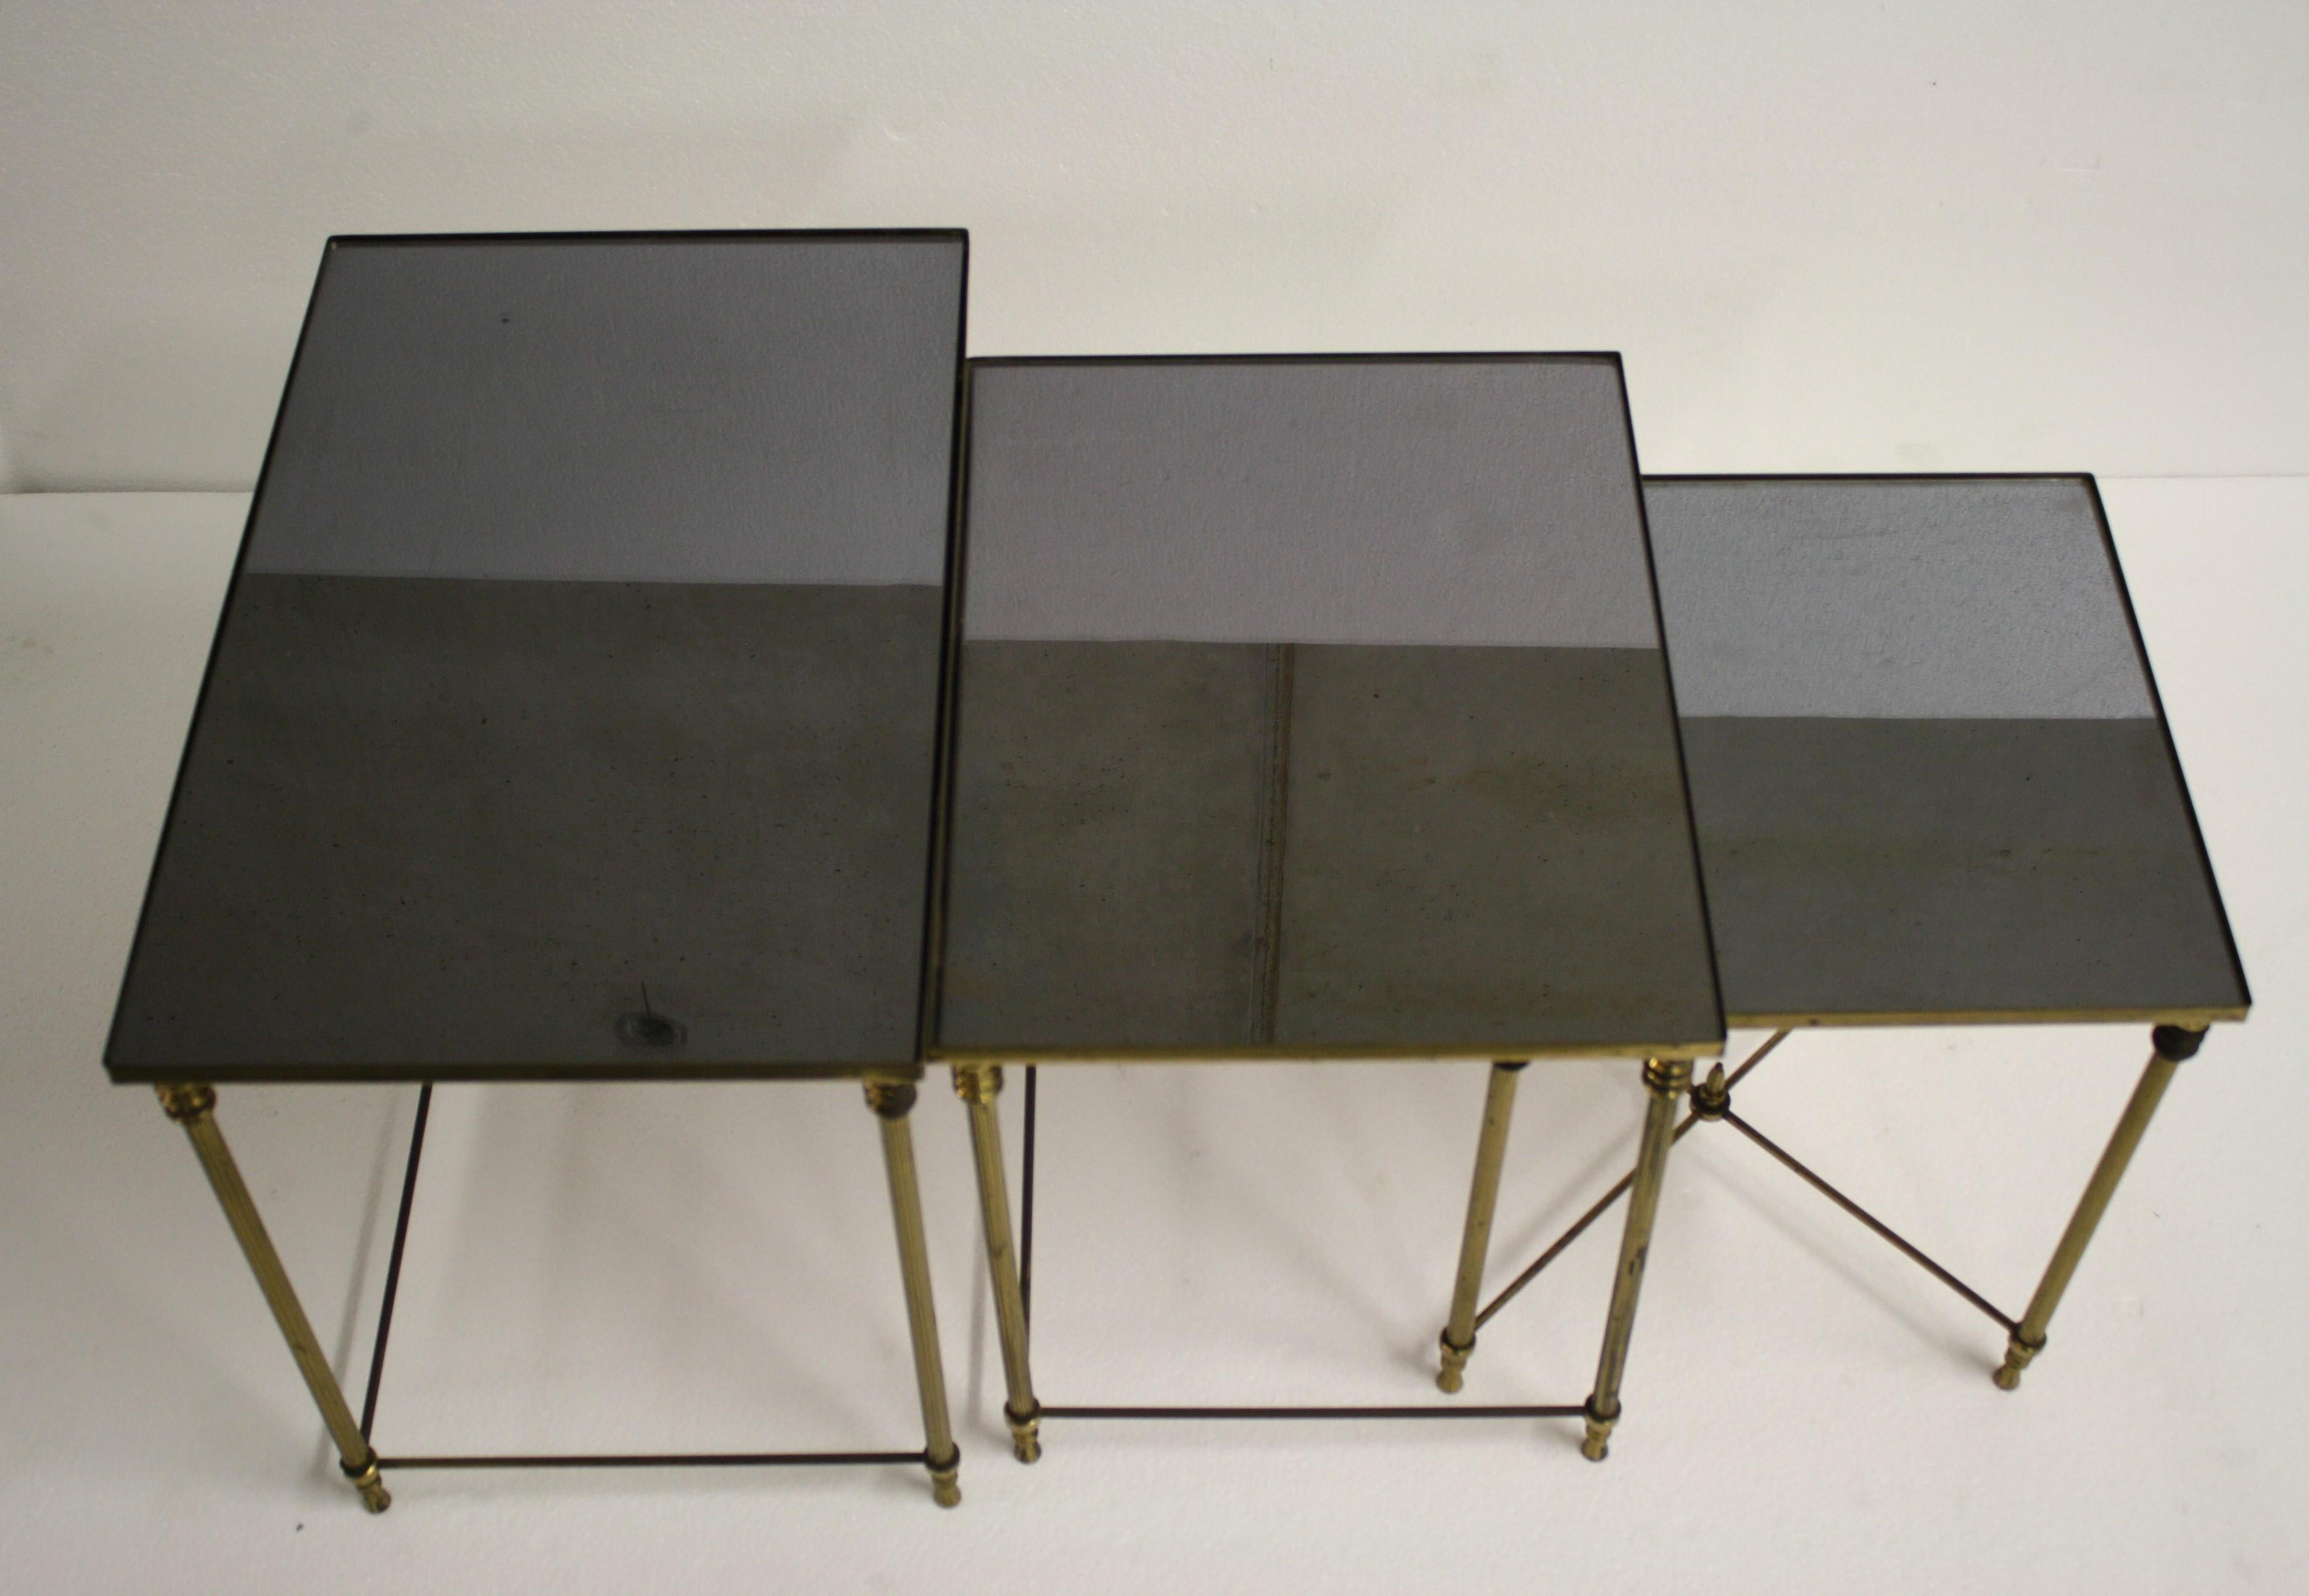 Lovely set of brass neoclassical nesting tables in the style of Maison Baguès.

The tables are made of patinated brass and reeded legs with smoked glass tops.

The frames have some lovely details and is in overall good condition.

Note that